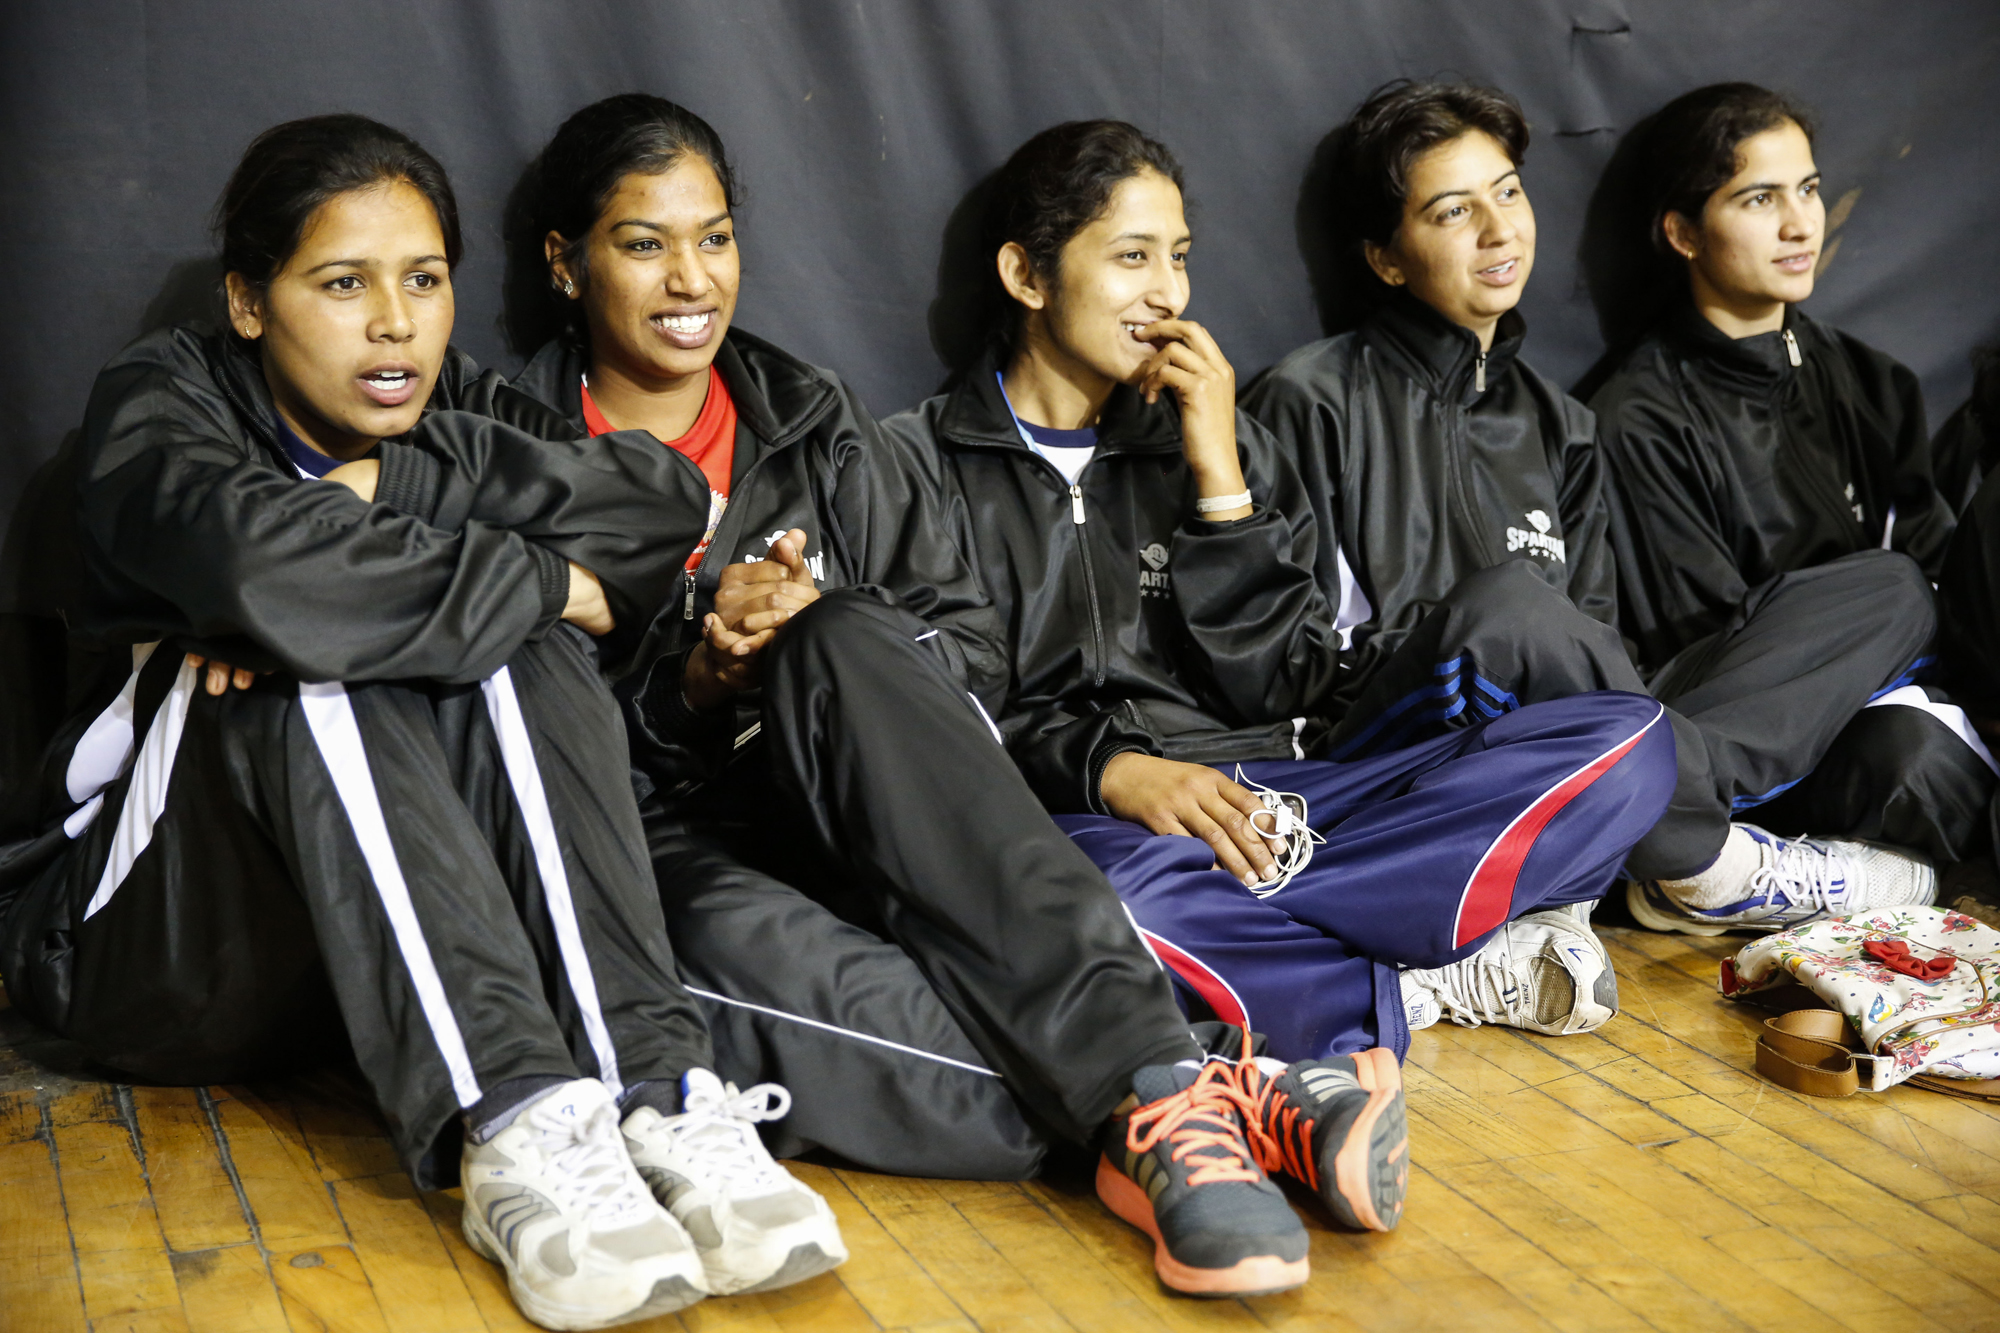 Members of the Rajasthan Women’s team watching the action at the 64th Senior National Basketball Championship for Men and Women, Delhi 2014.